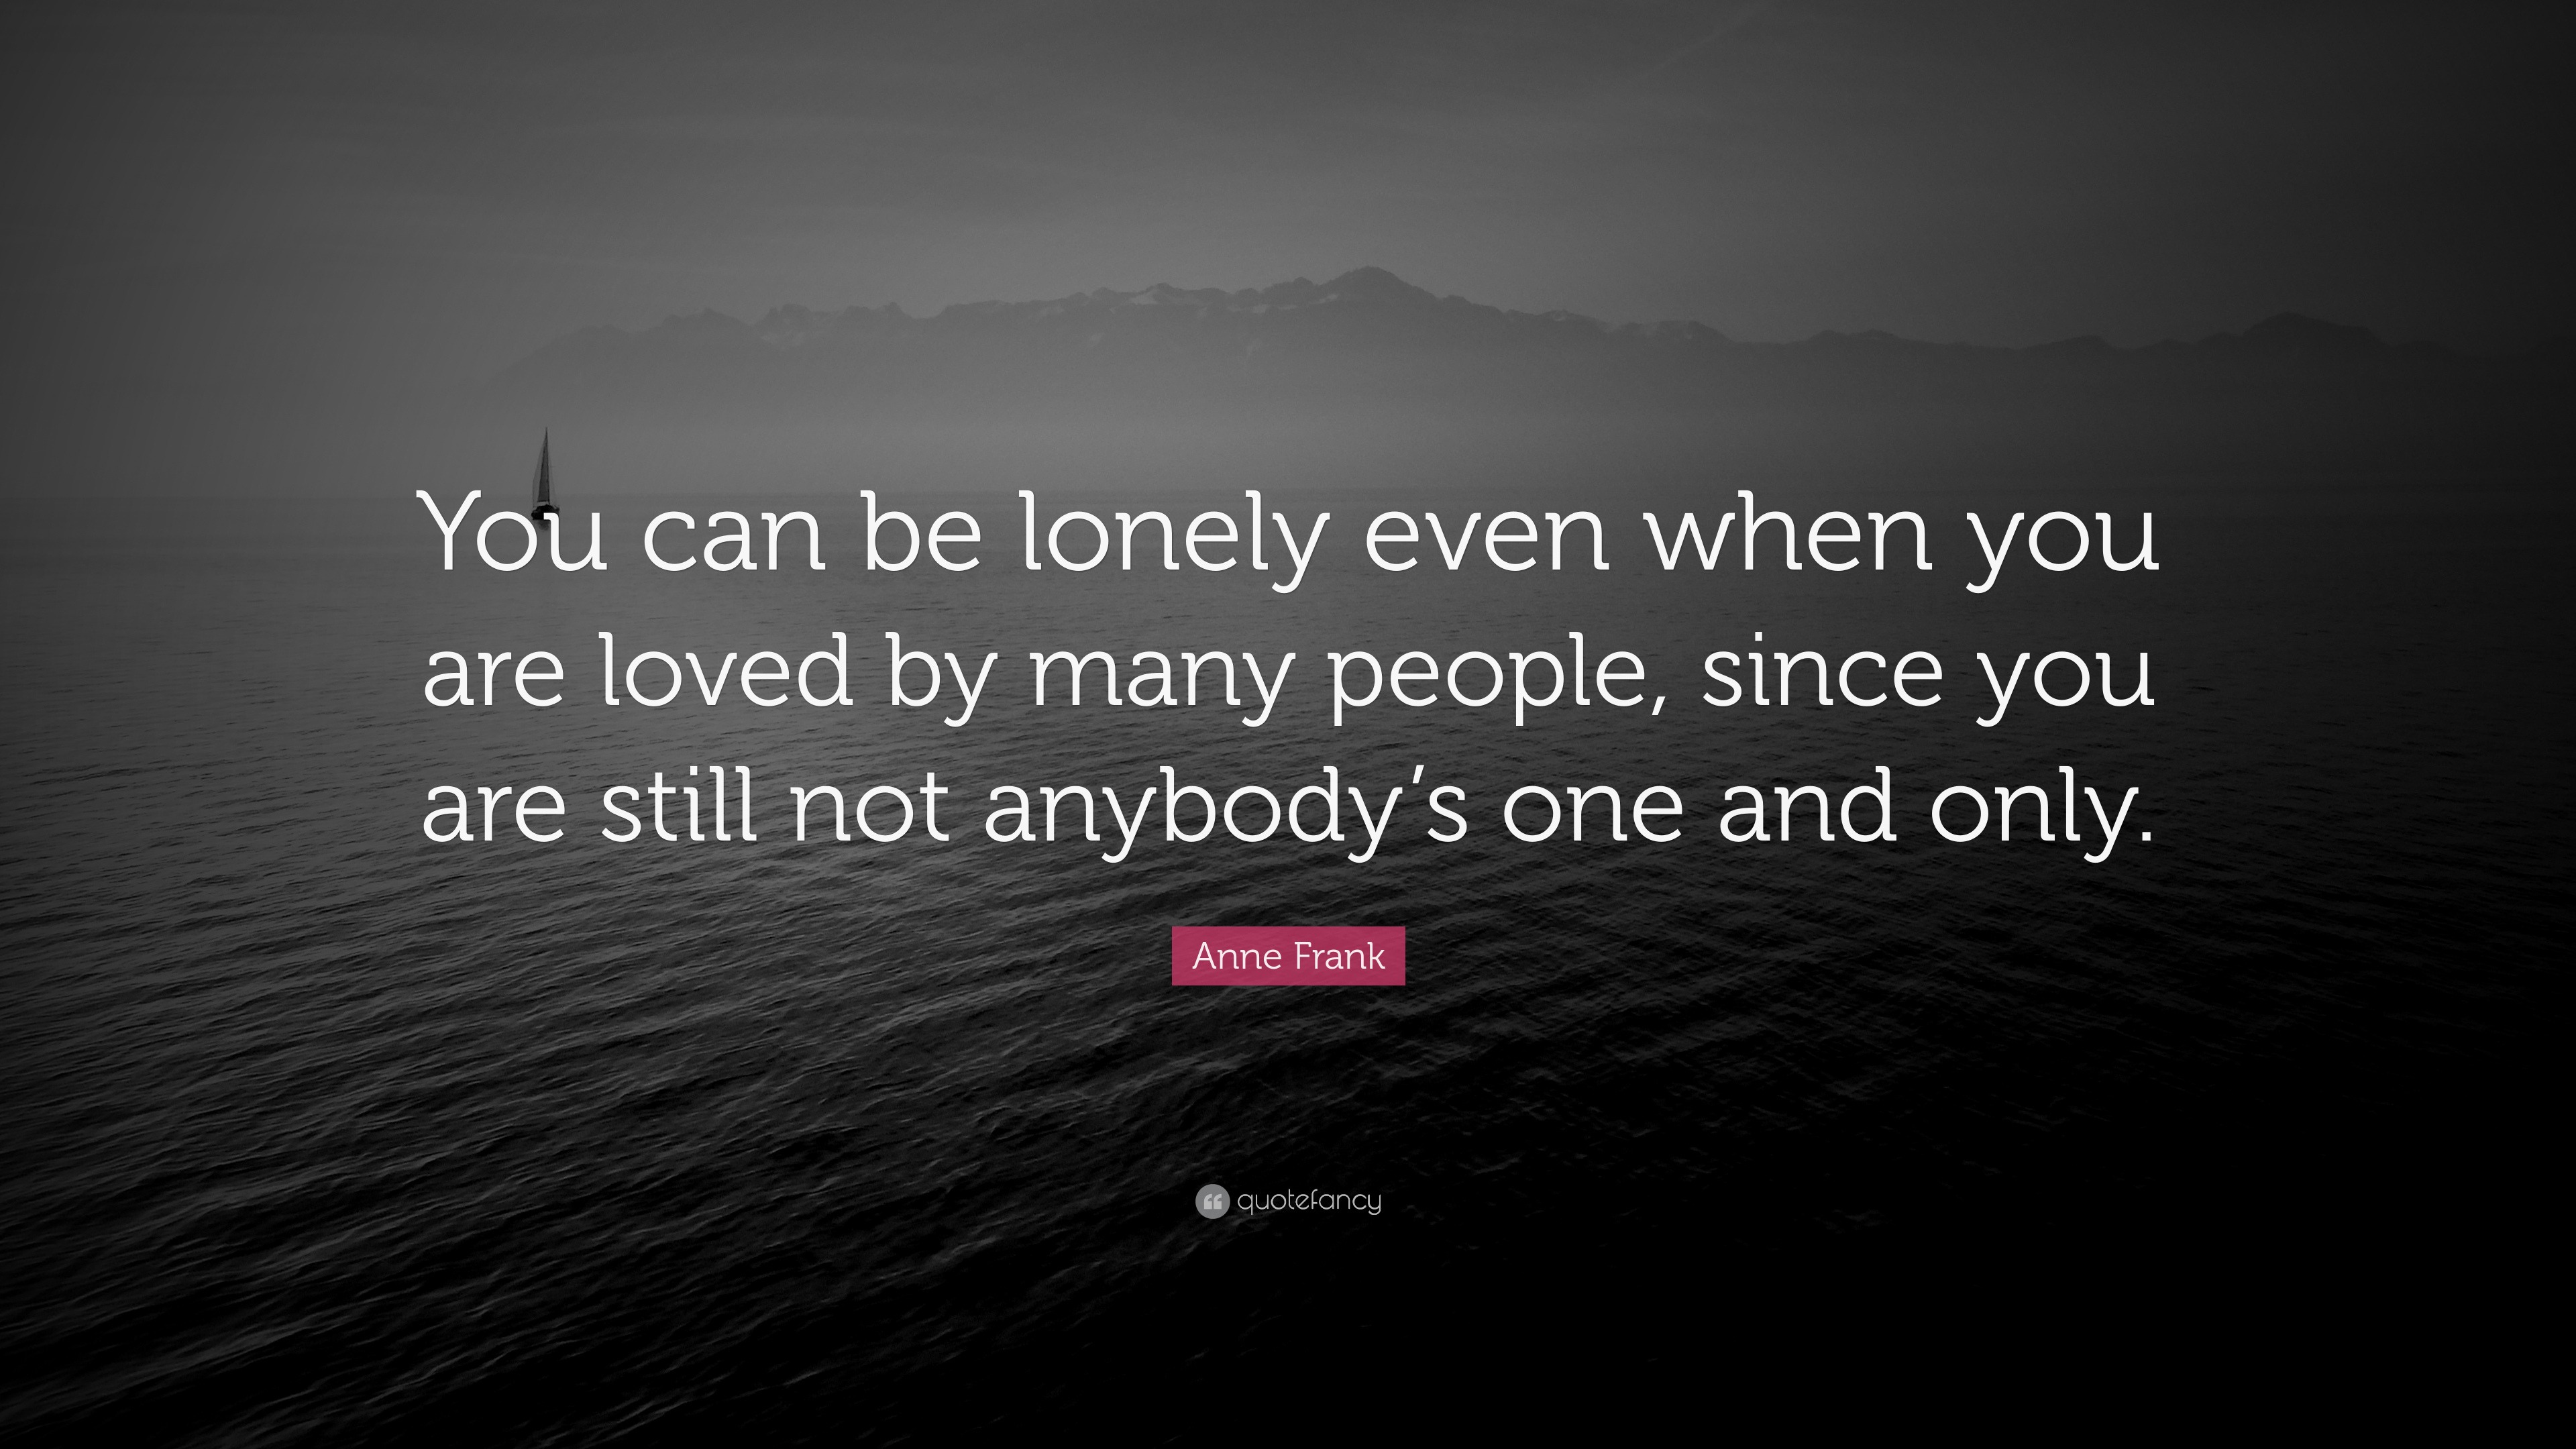 When you are alone, you are not with any other people. E.g. He